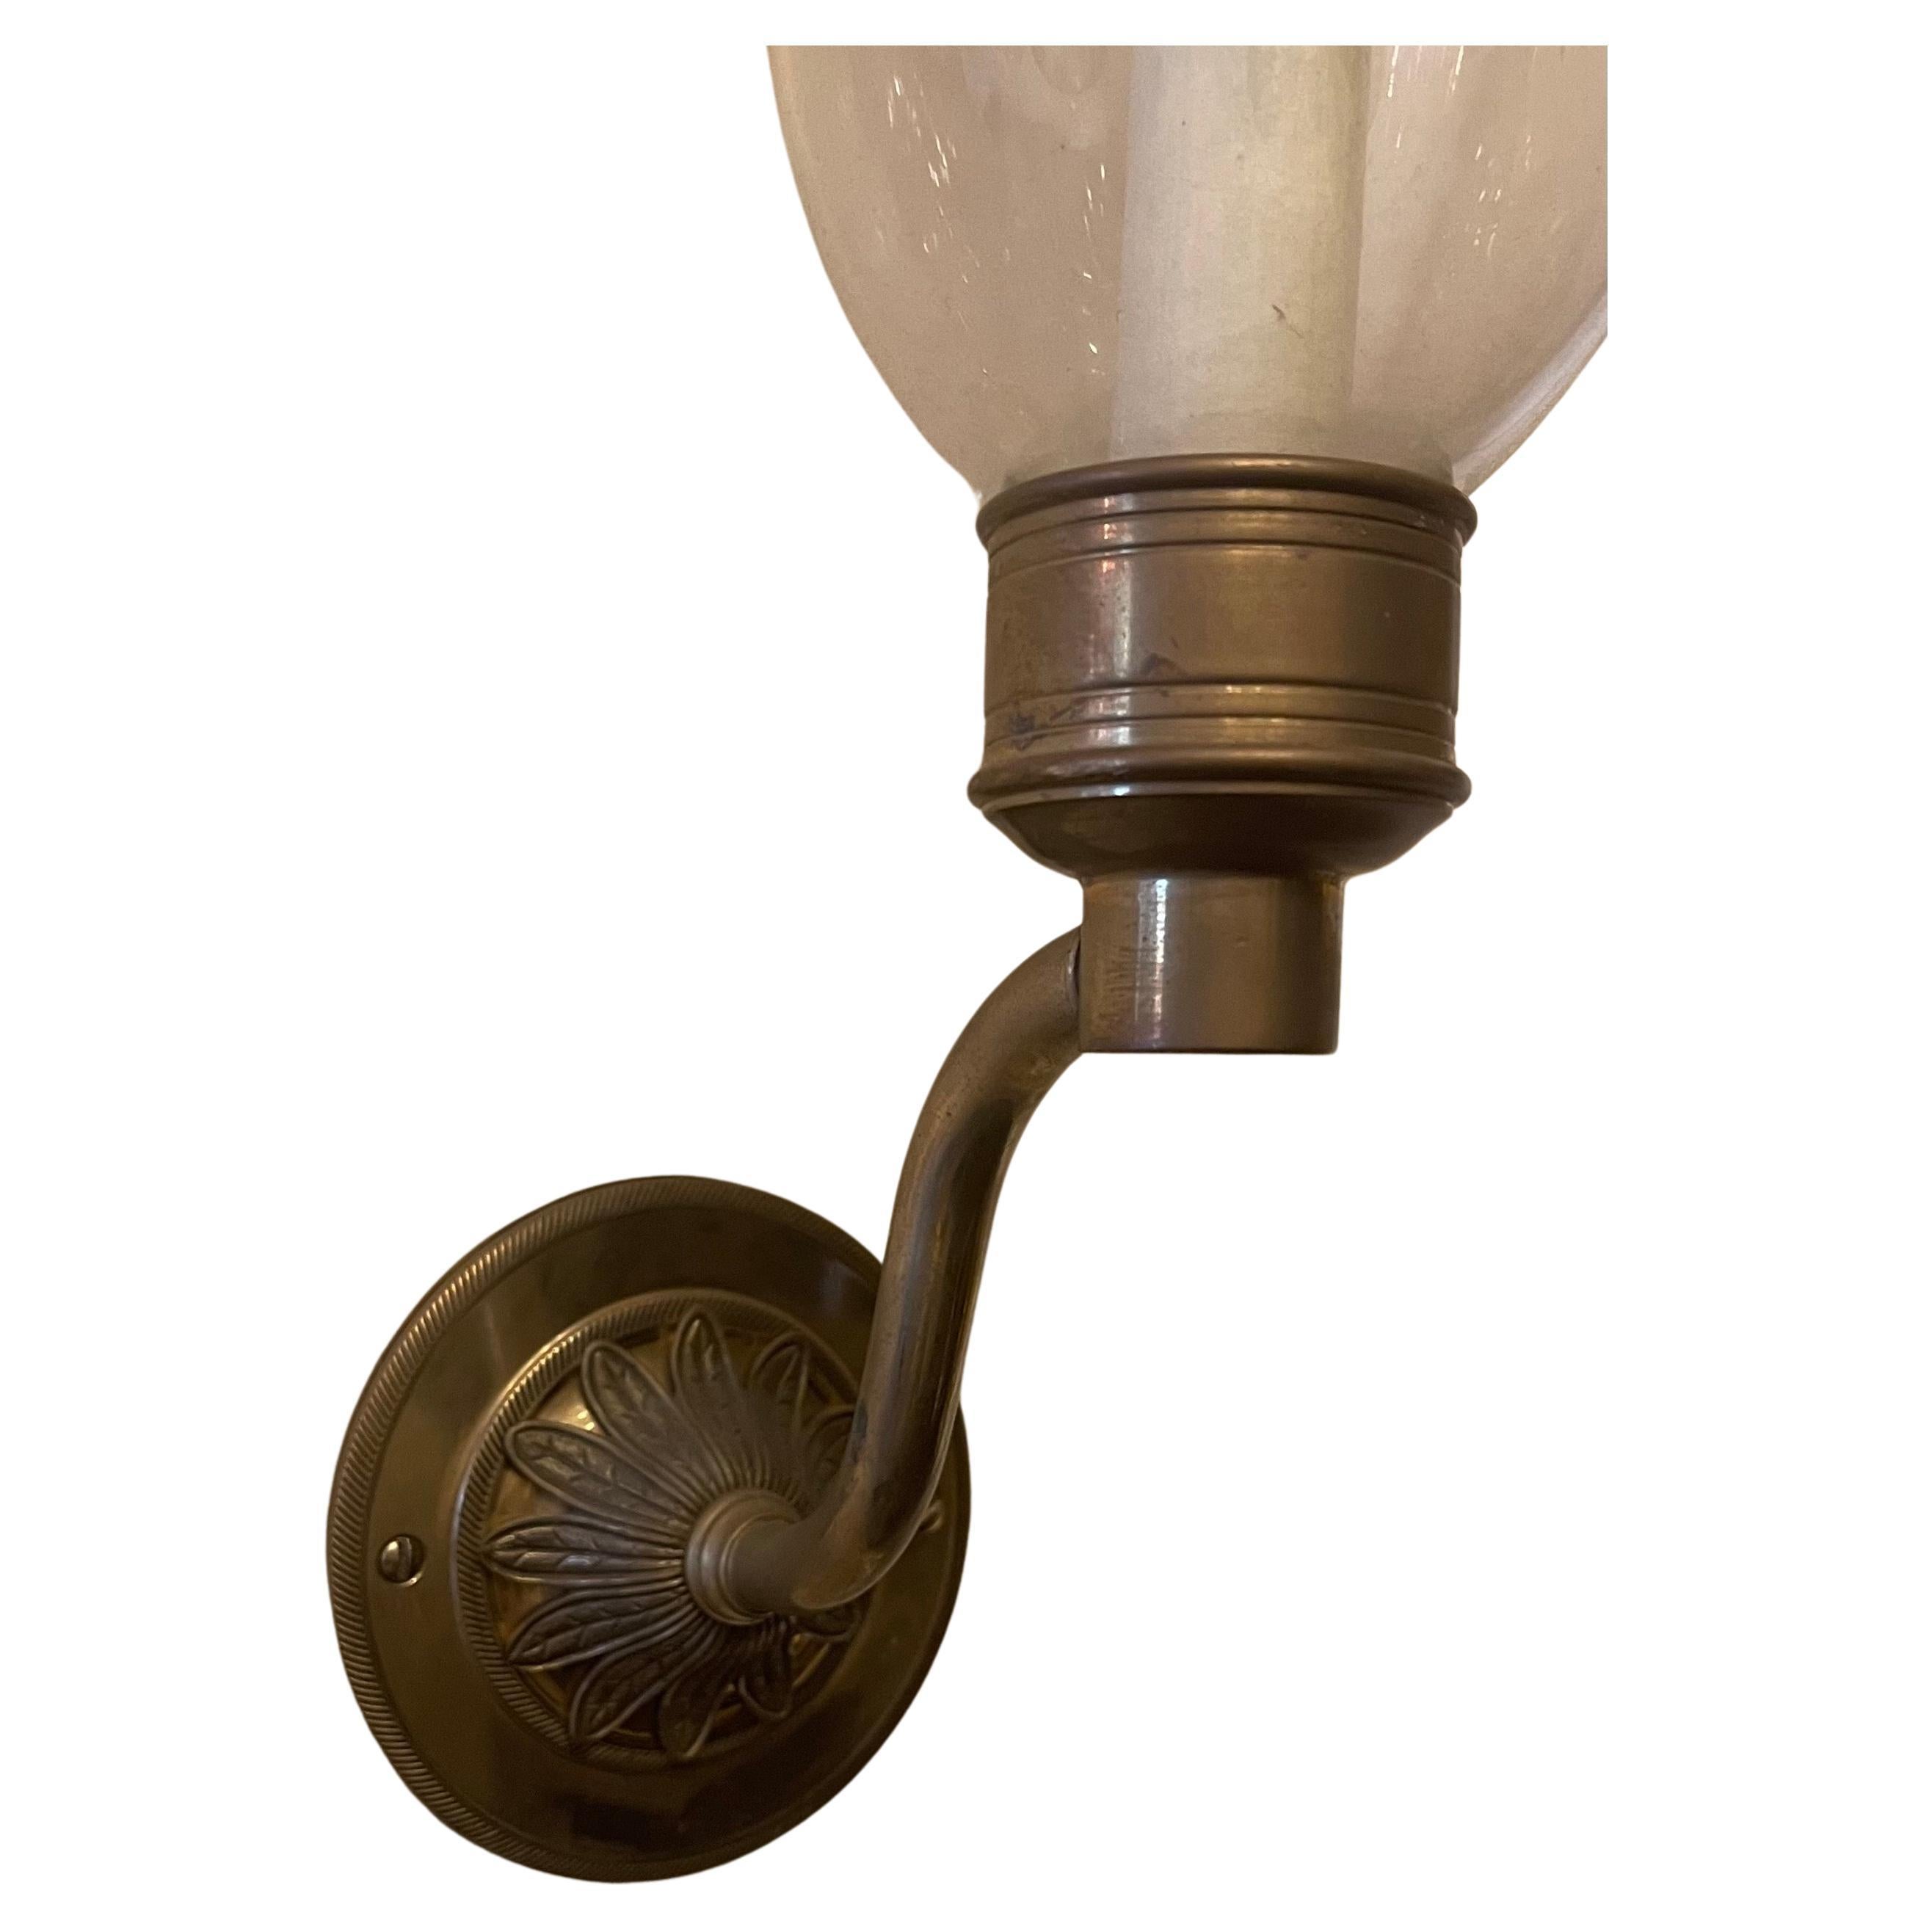 A Wonderful Pair Of Bronze And Etched Hurricane Glass Georgian / Regency Style Vaughan Designs Wall Sconces Each With A Candelabra Socket That Comes Ready To Install With Mounting Hardware.